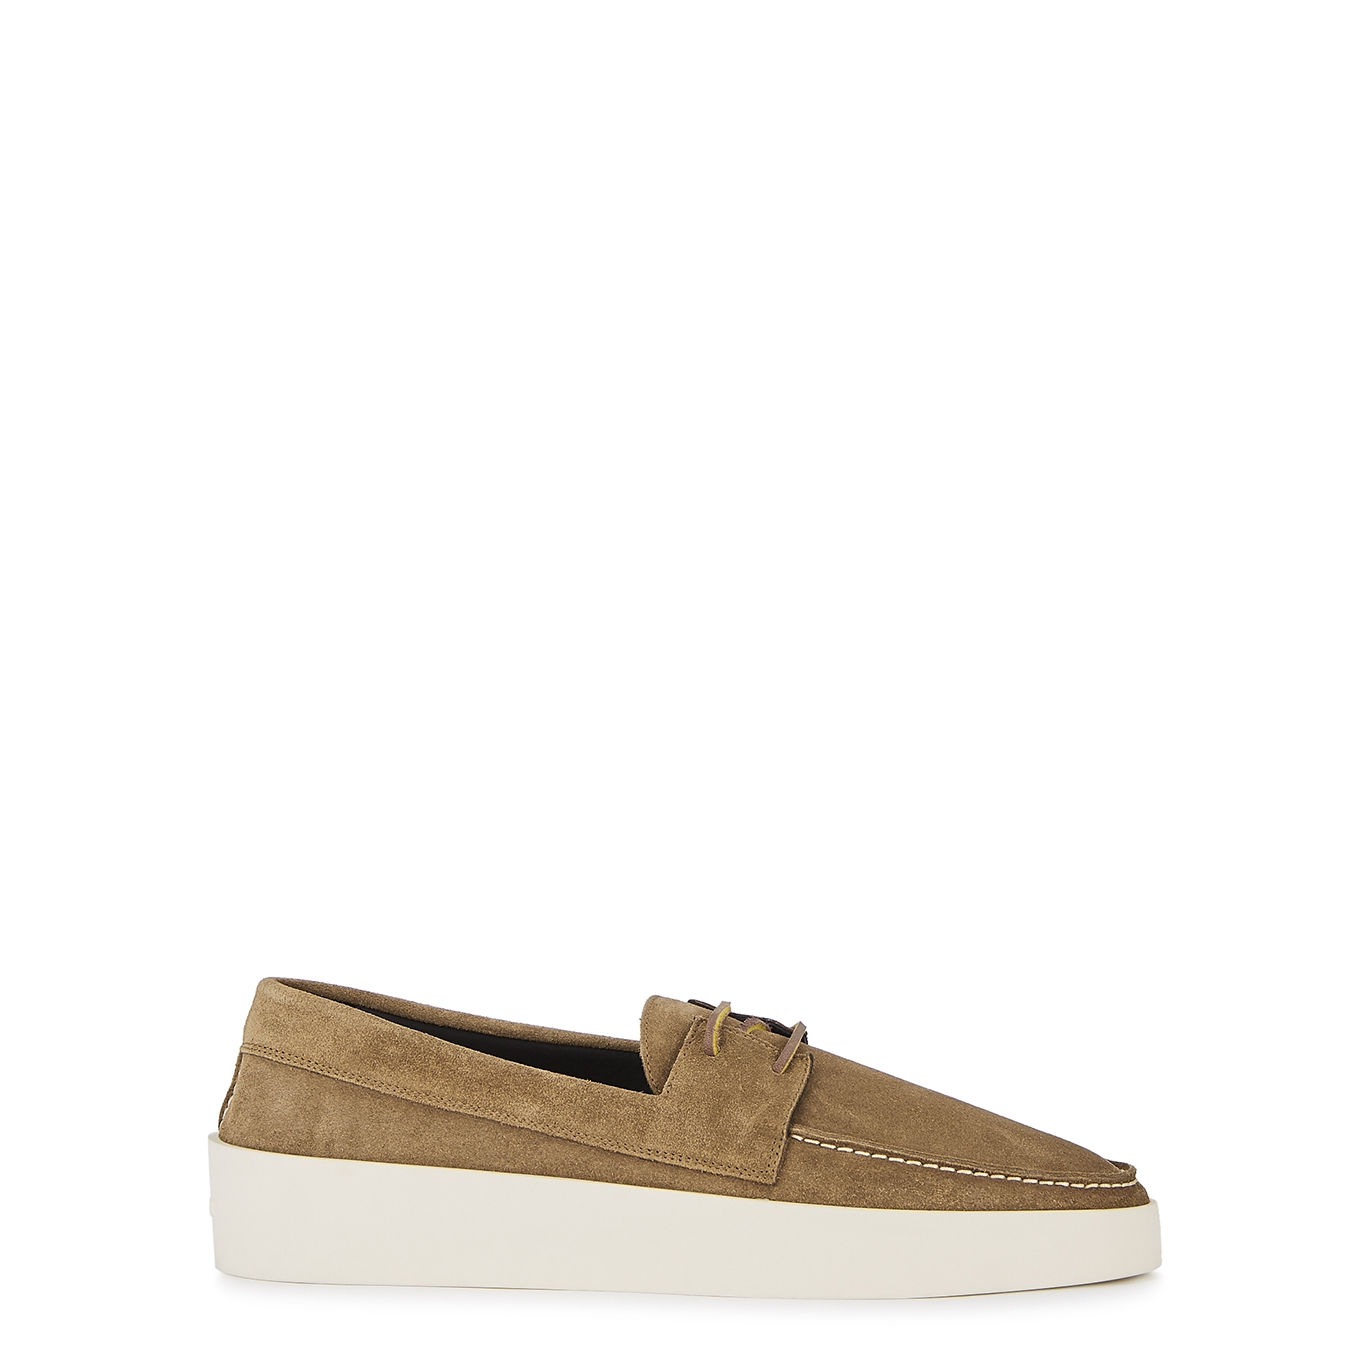 Fear Of God Brown Suede Boat Shoes - Dark Brown - 6